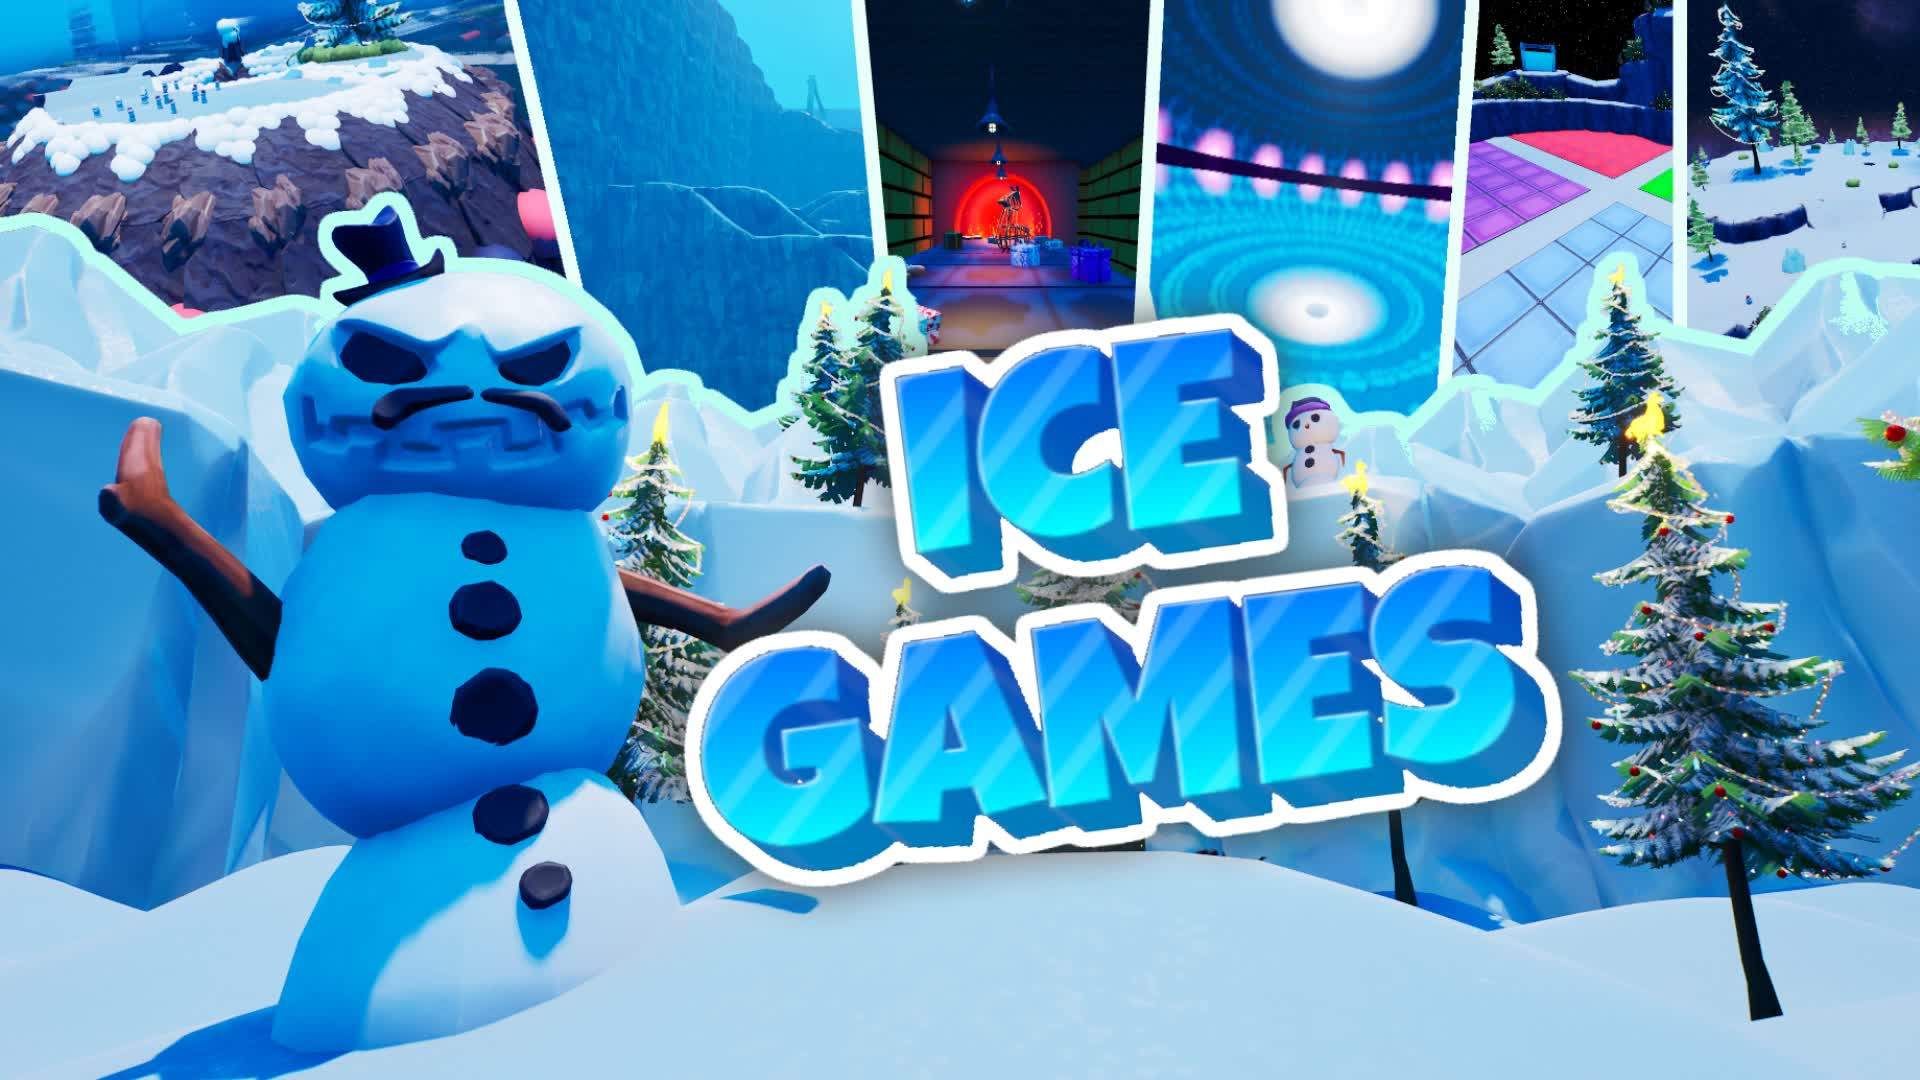 ❄ The Ice Games! ❄